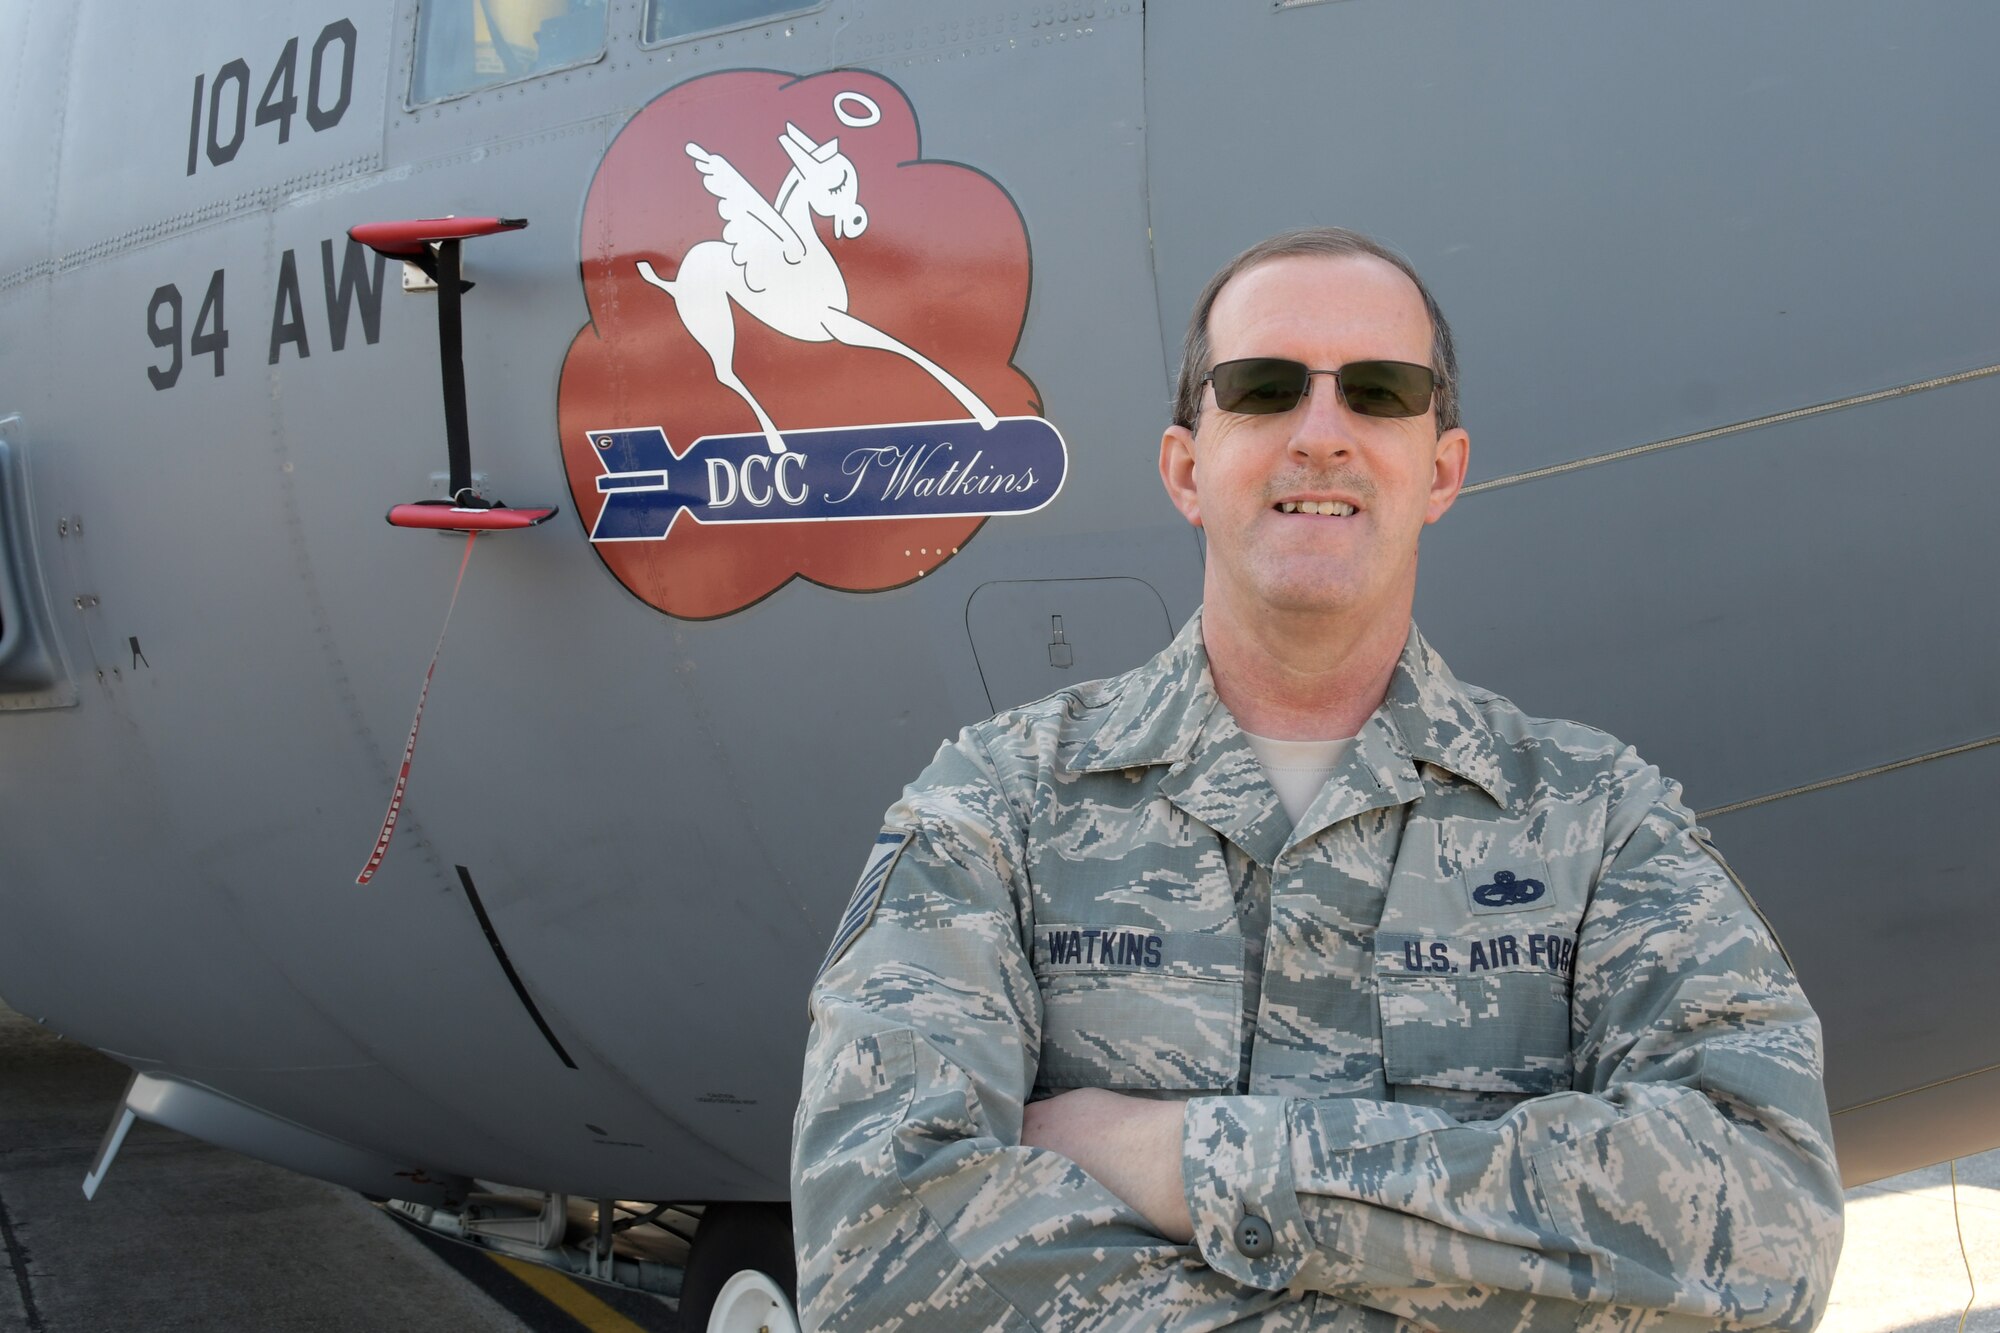 Master Sgt. Tim Watkins, 94th Aircraft Maintenance Squadron dedicated crew chief, poses for a photo in front of the C-130H3 Hercules he maintains at Dobbins Air Reserve Base, Ga. on May 4, 2020. Watkins retired this week after 34 years of service - 29 of which were at Dobbins. (U.S. Air Force photo/Andrew Park)